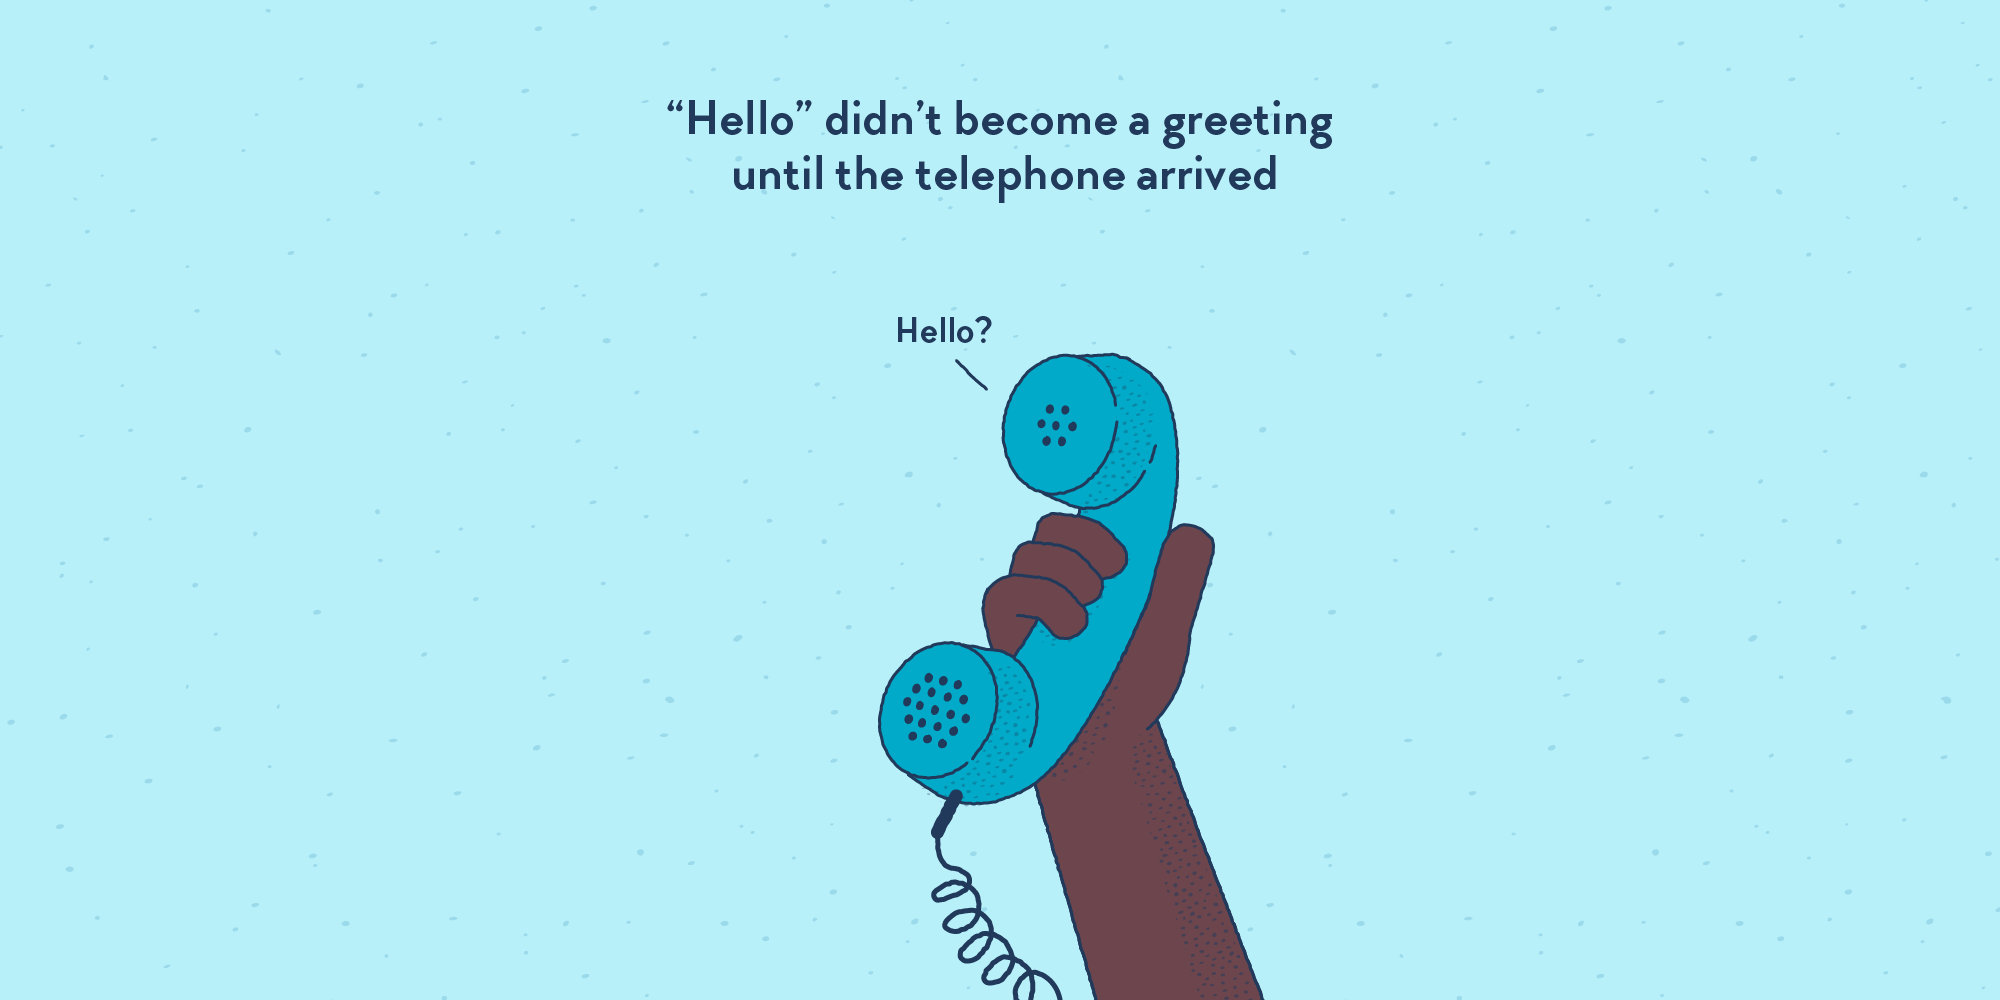 A hand holding a old-school telephone handset. “Hello”, says the phone.